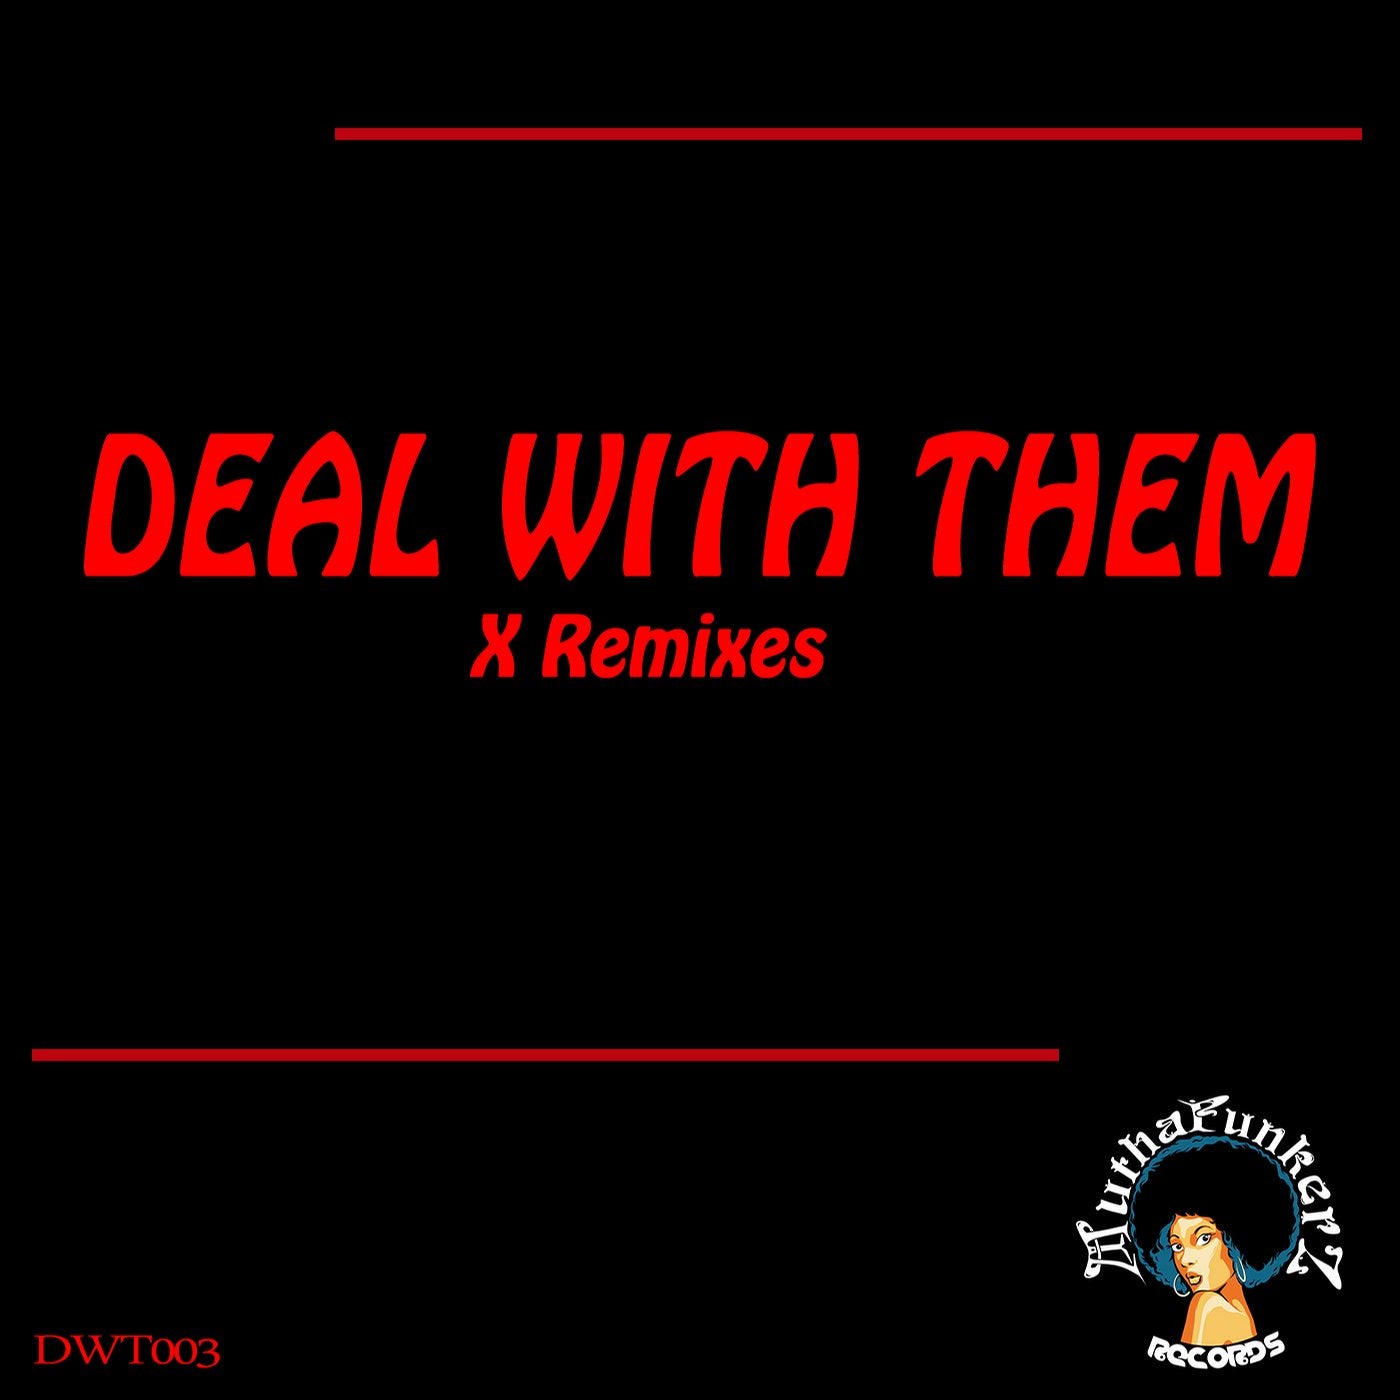 Deal With Them. X Remixes